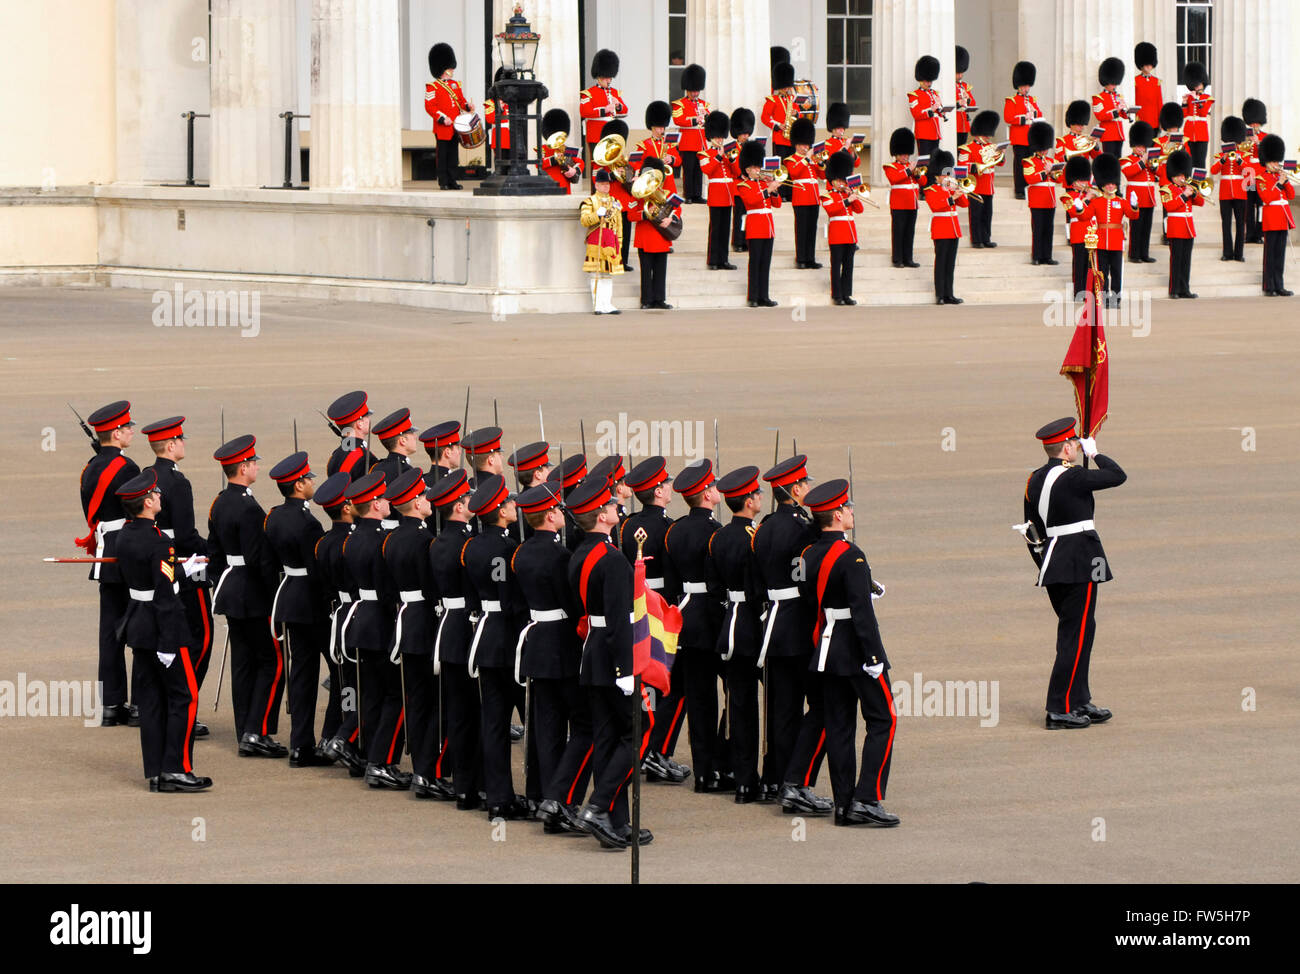 Grenadier Guards Band, The Royal Military Academy, Sandhurst, Sovereign’s Parade, officer graduation parade (officers are trained here), marching with colours Stock Photo